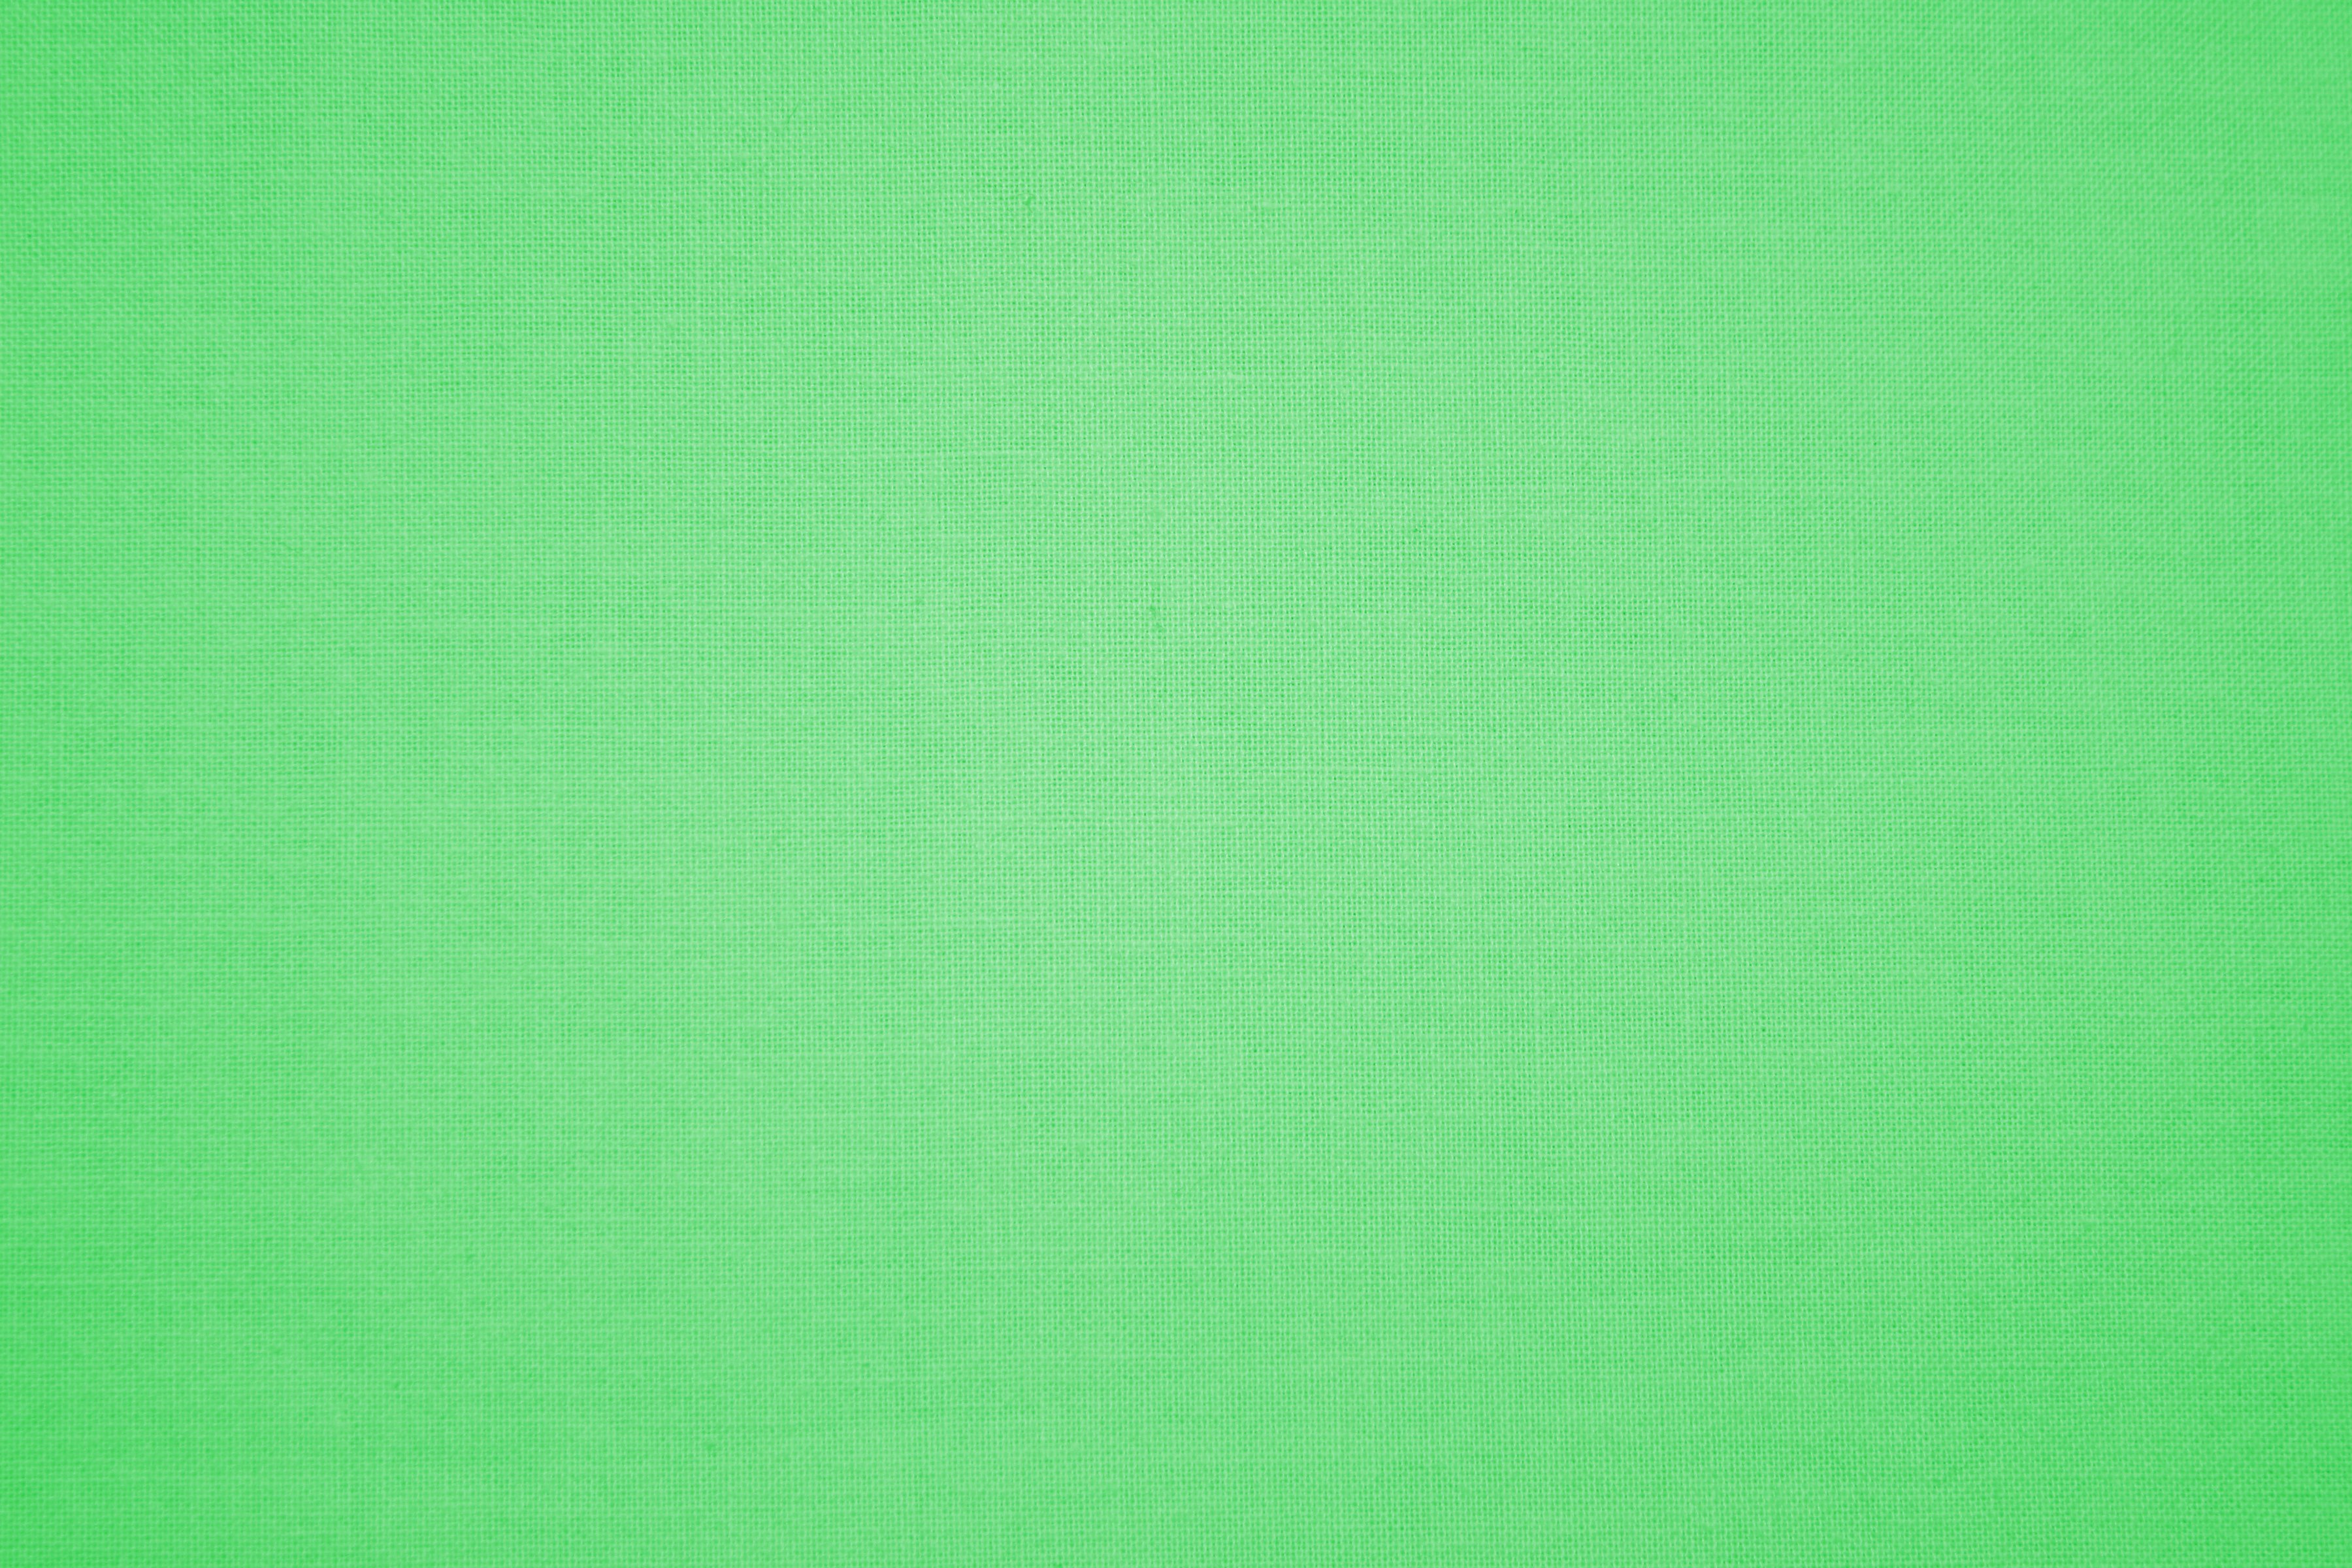 Light Green Canvas Fabric Texture Picture Free Photograph Photos